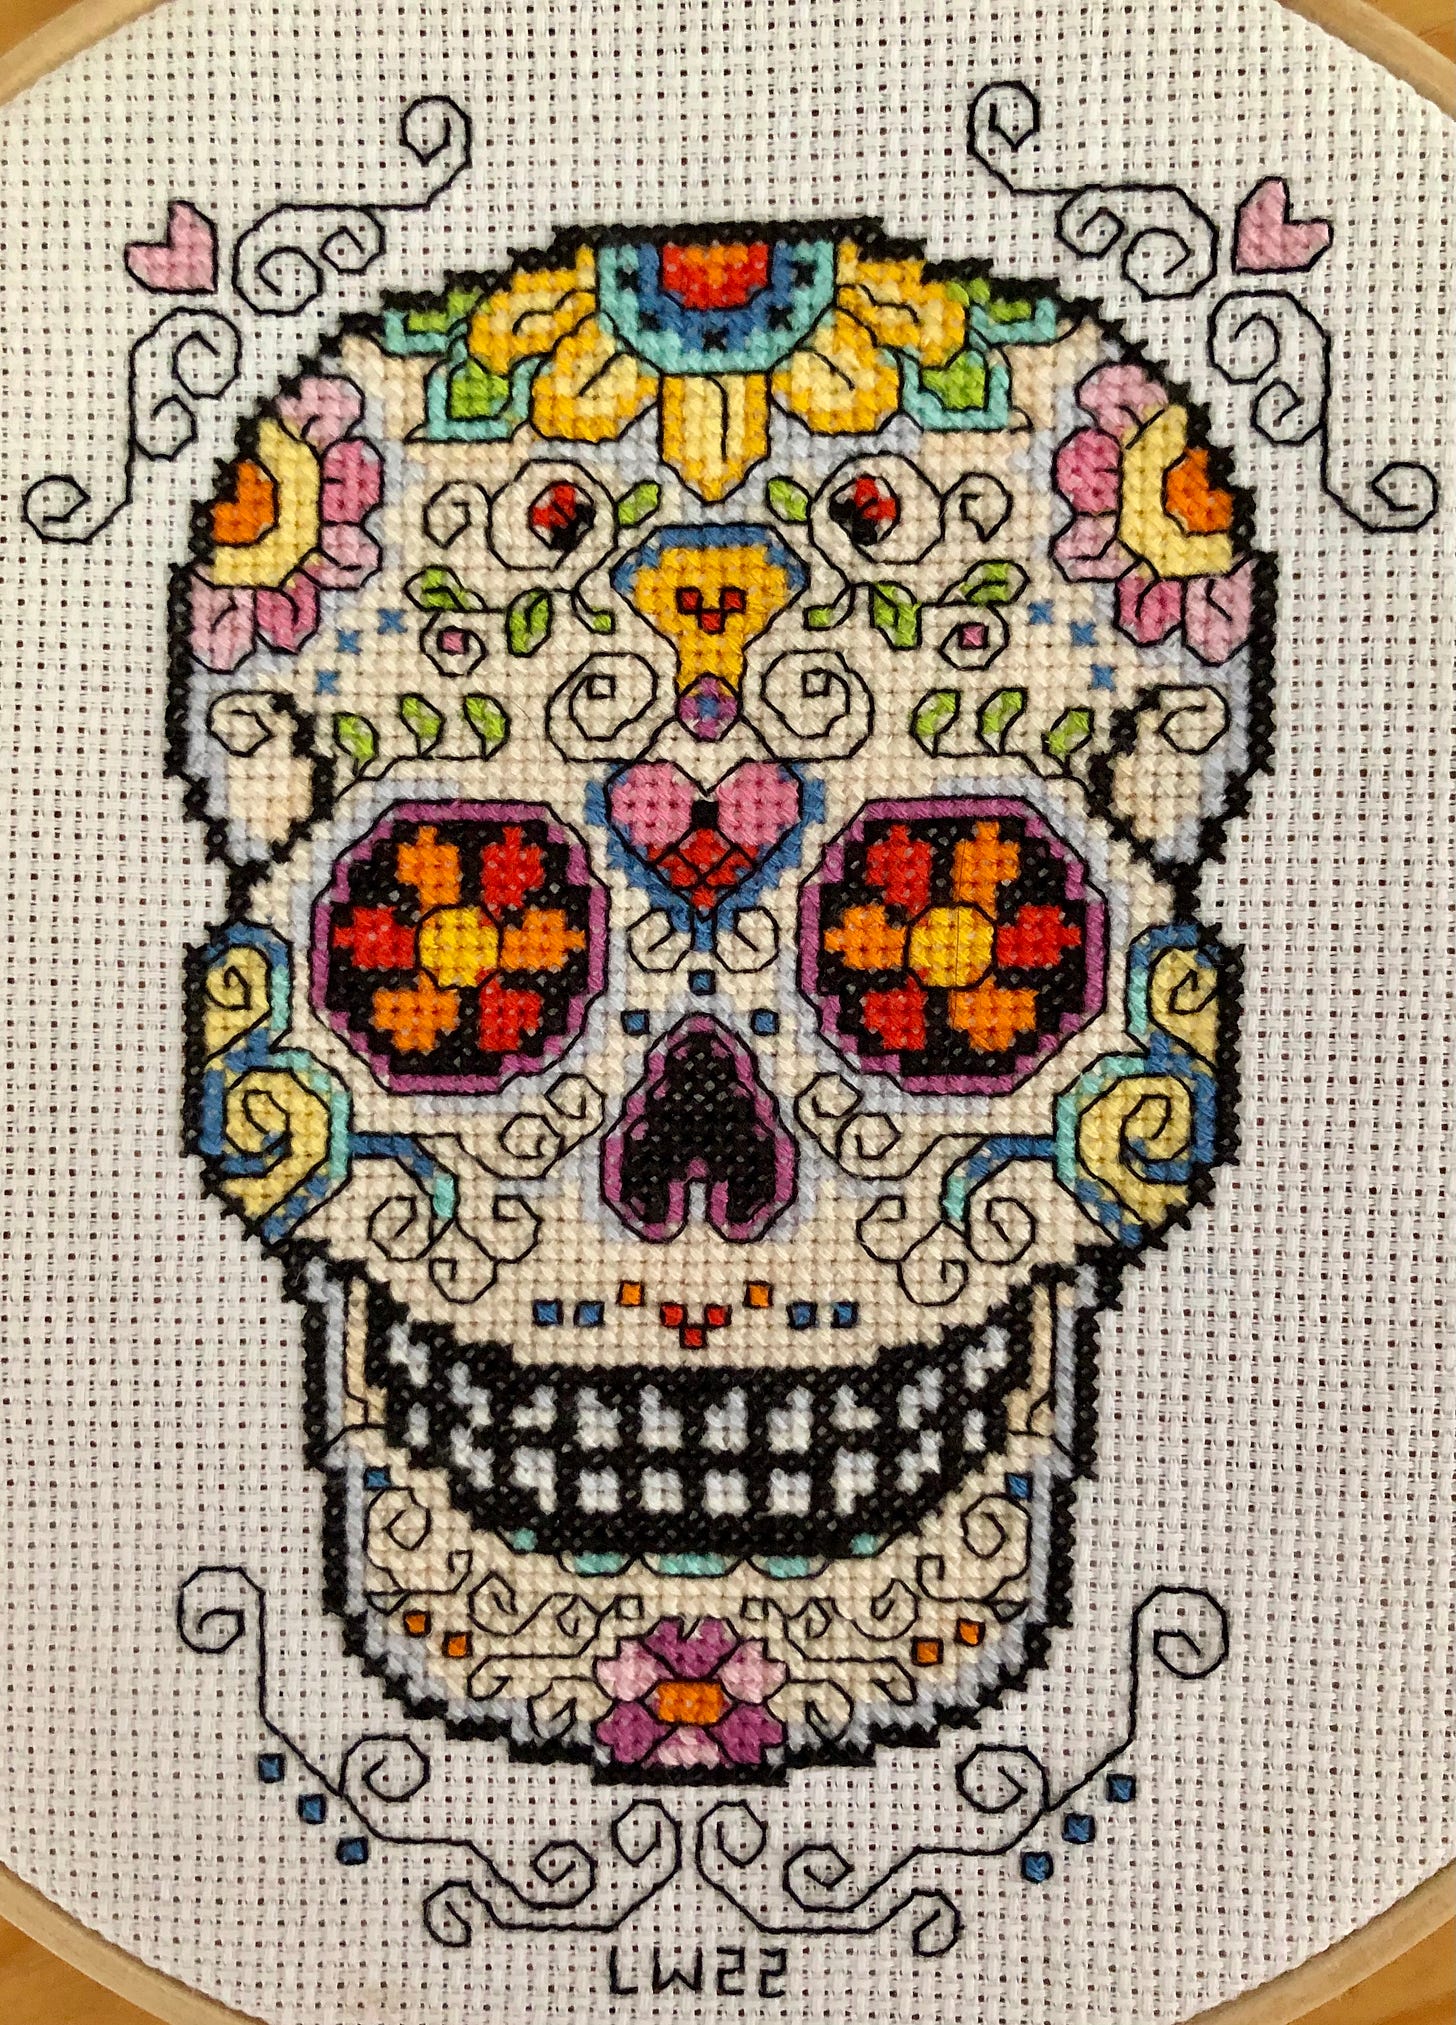 A cross-stitched image of a Day of the Dead sugar skull